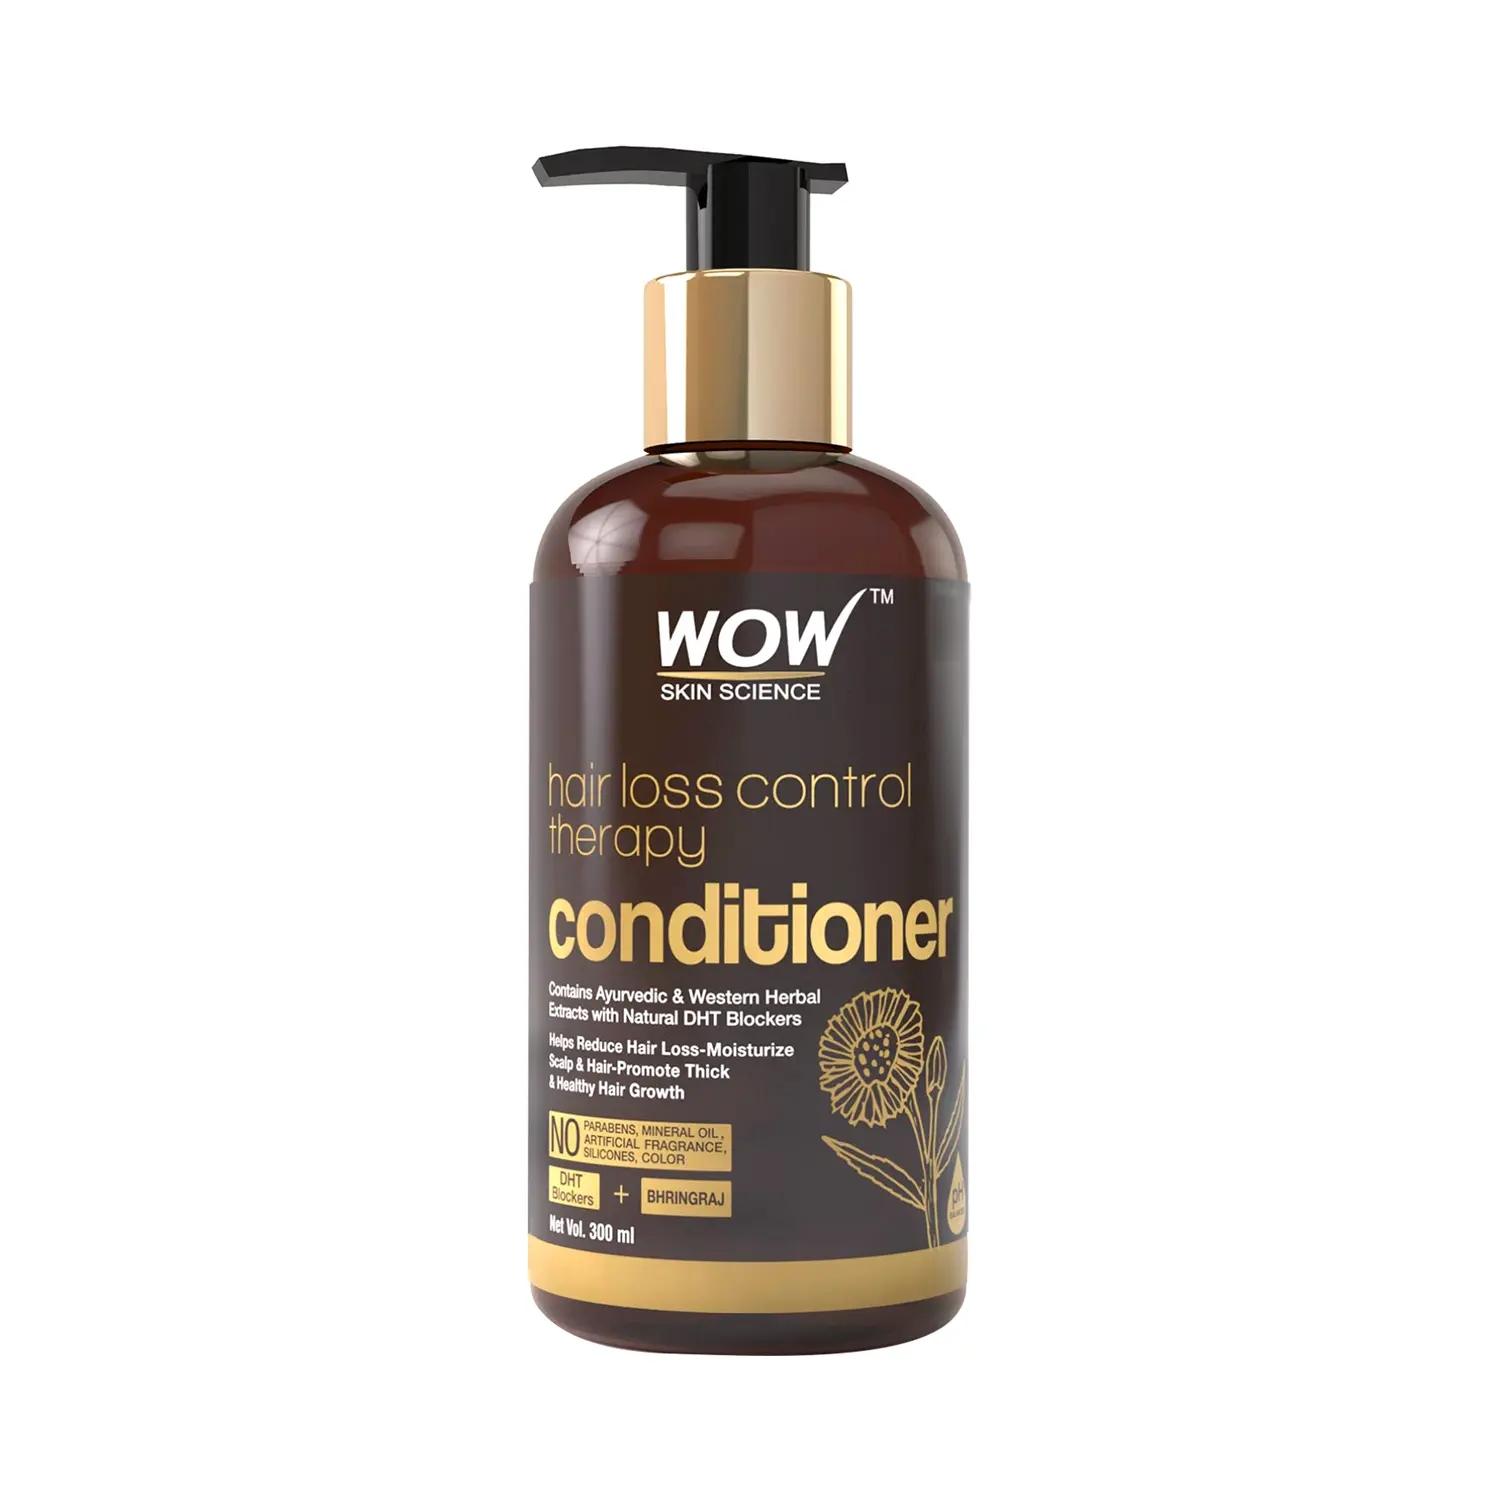 wow skin science hair loss control therapy conditioner (300ml)